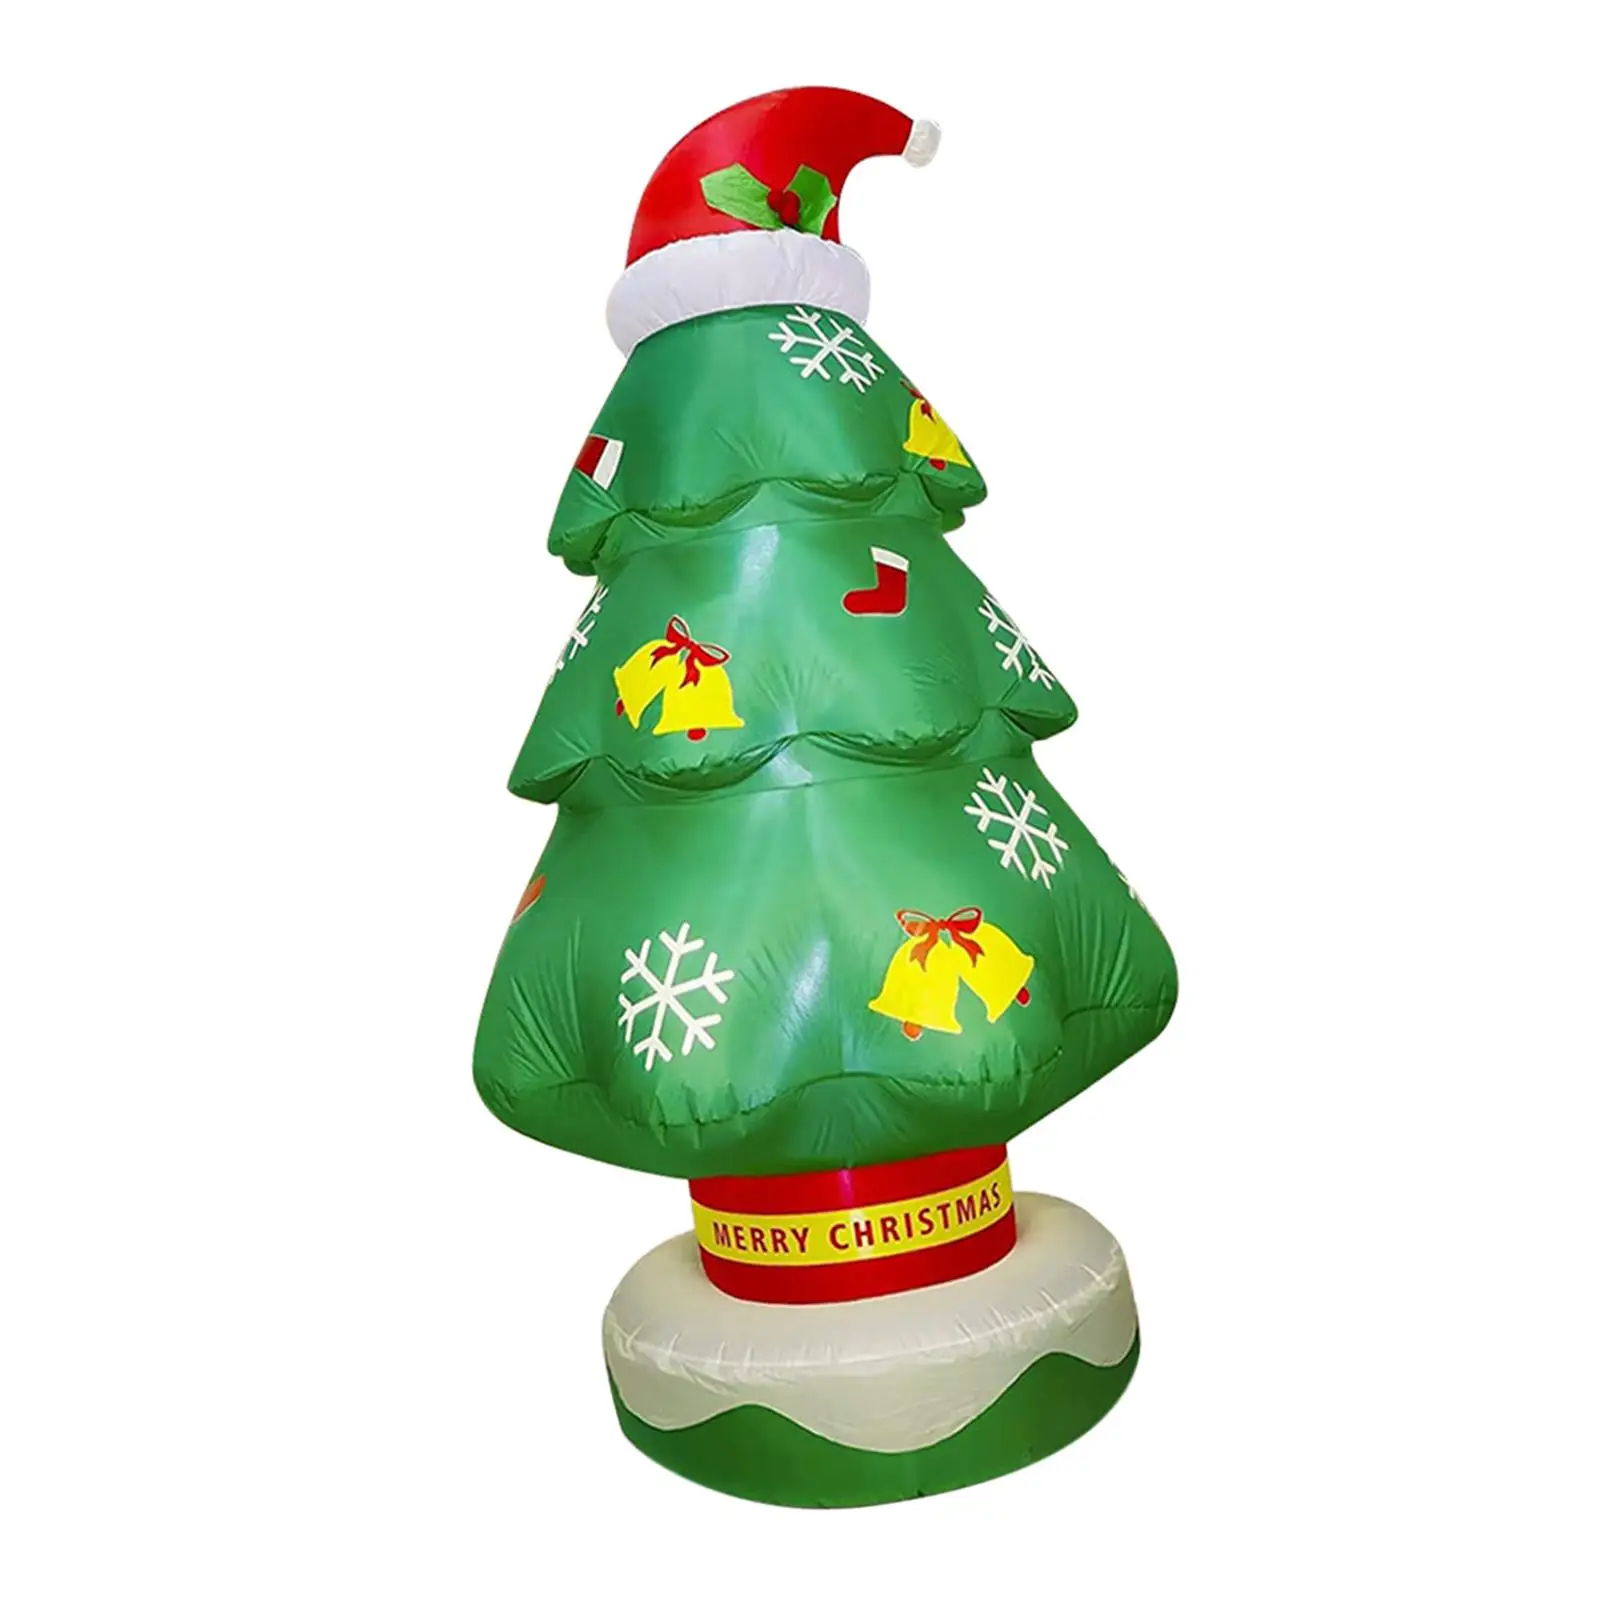 2.1Meters Inflatable Christmas Tree Inflatable Christmas Decoration Luminous Tree for Lawn Holiday Garden Outdoor Party Decor